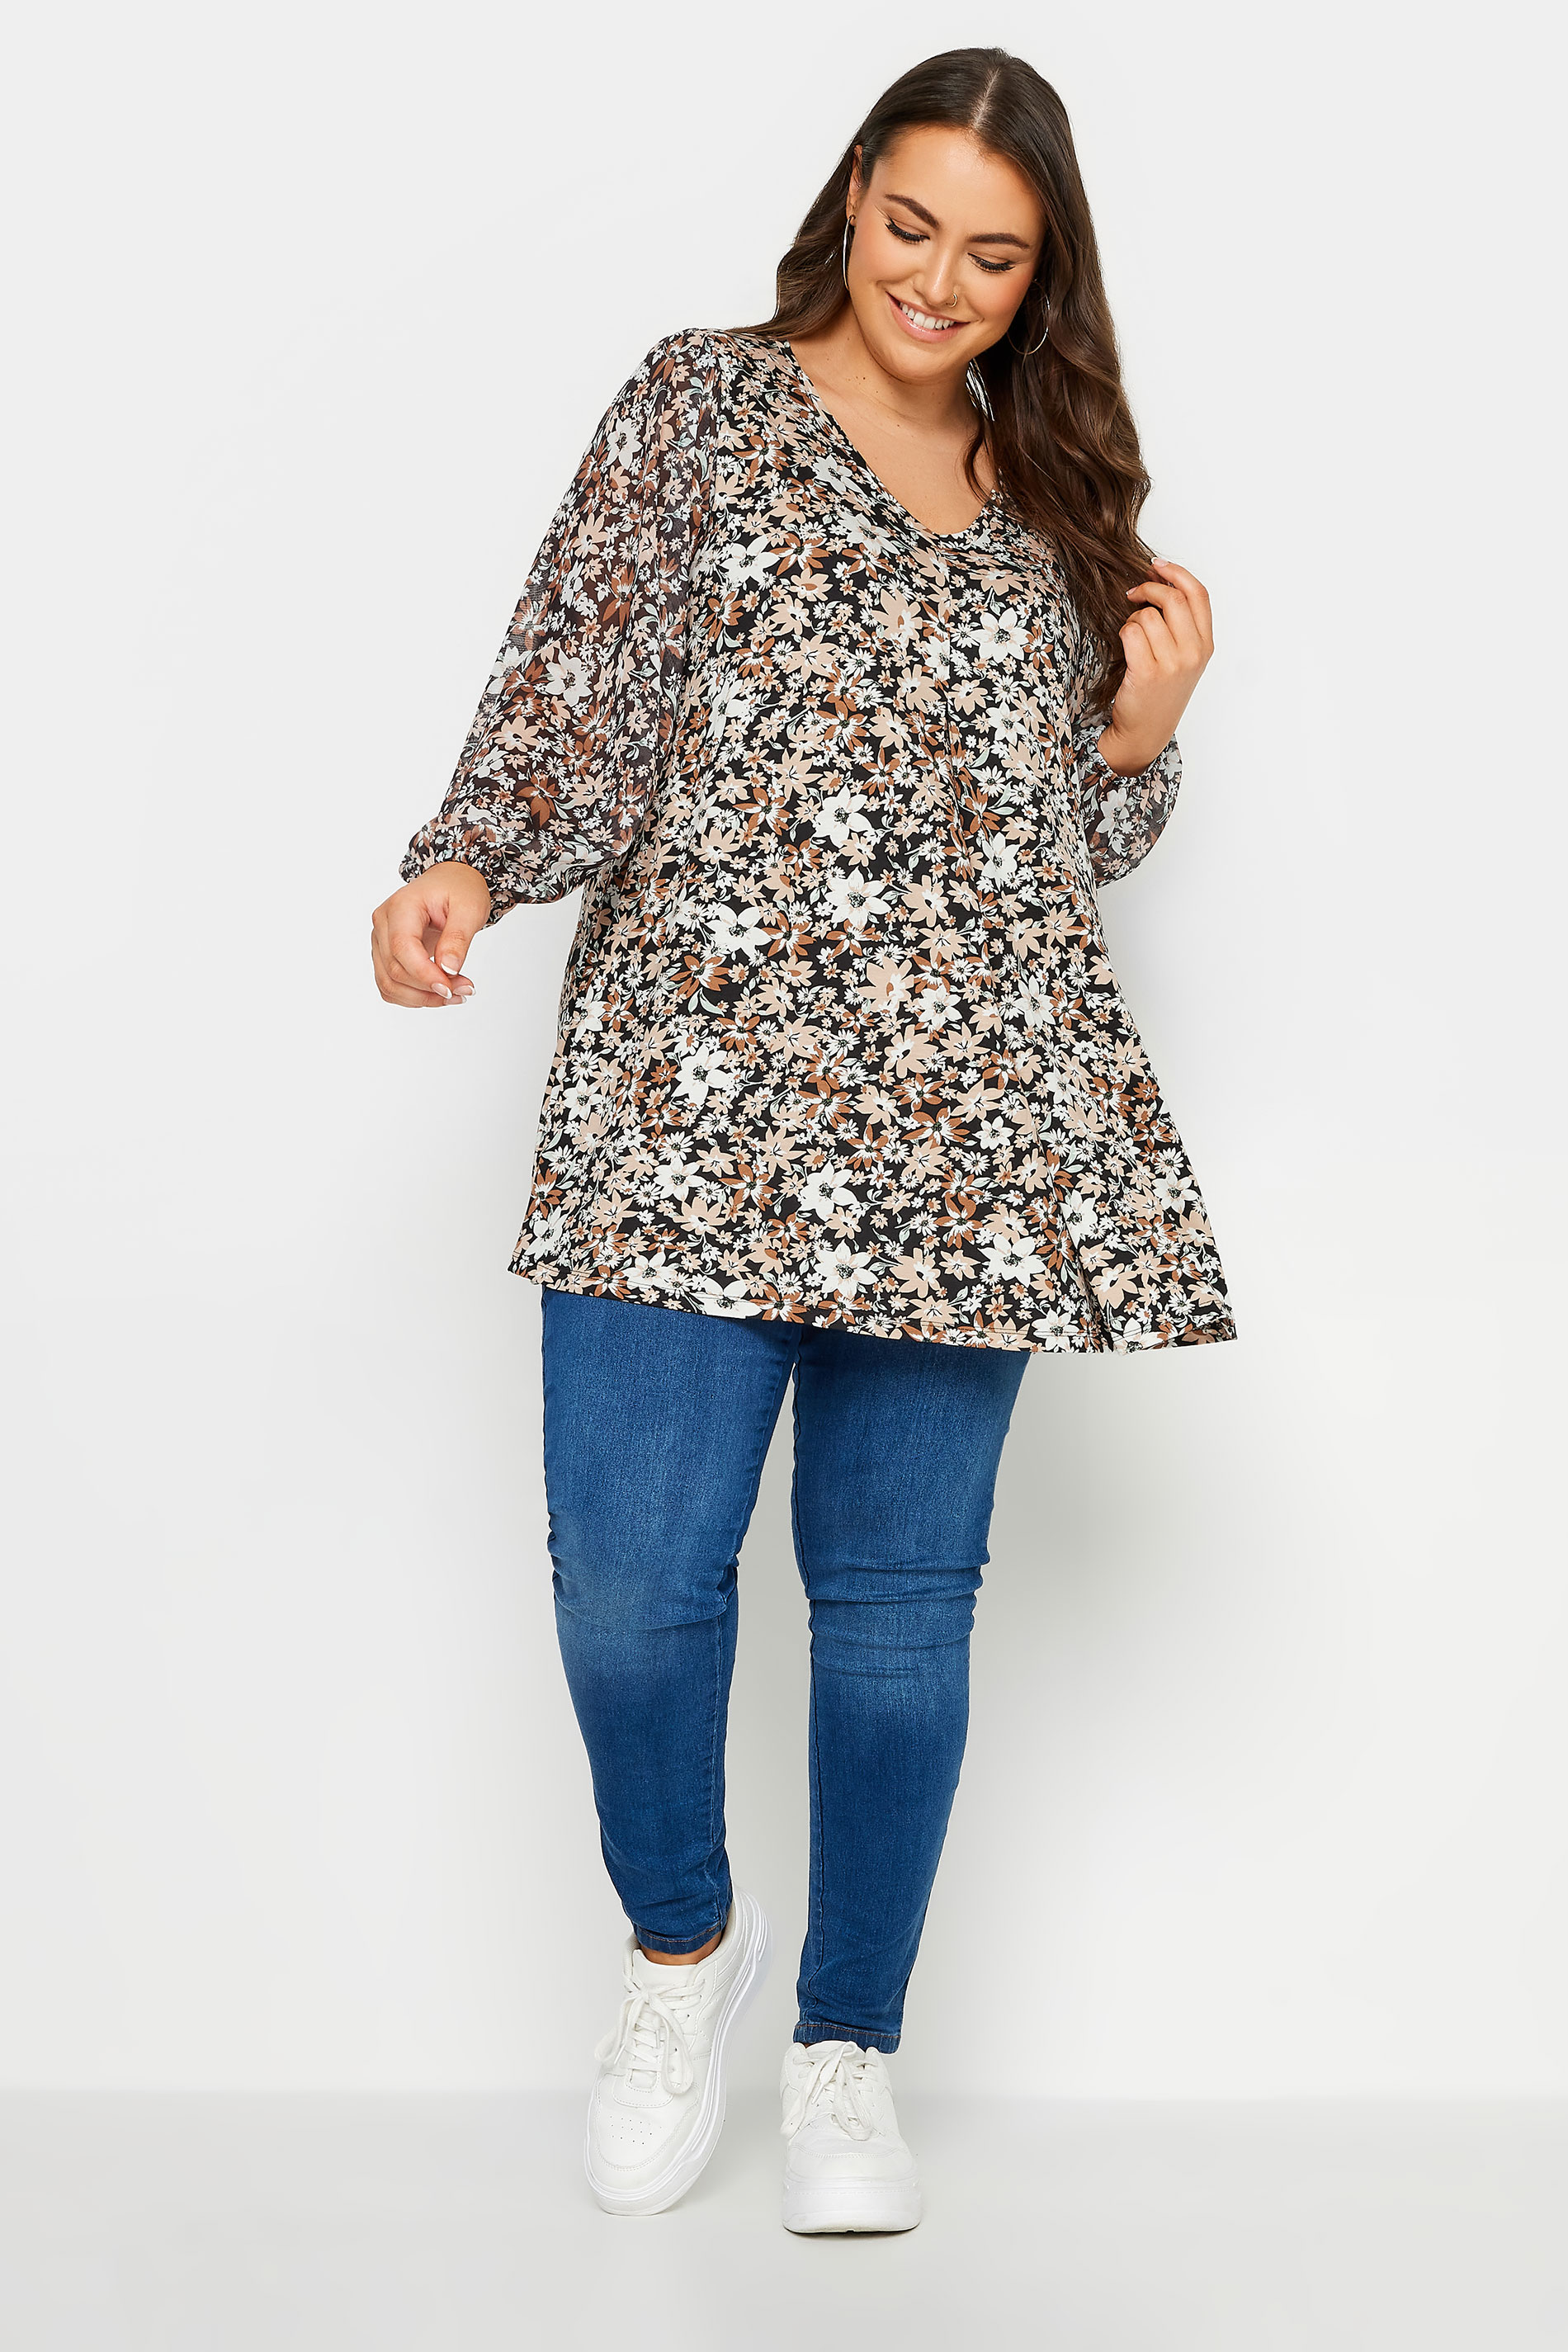 YOURS Plus Size Black Floral Print Mesh Swing Top | Yours Clothing 2